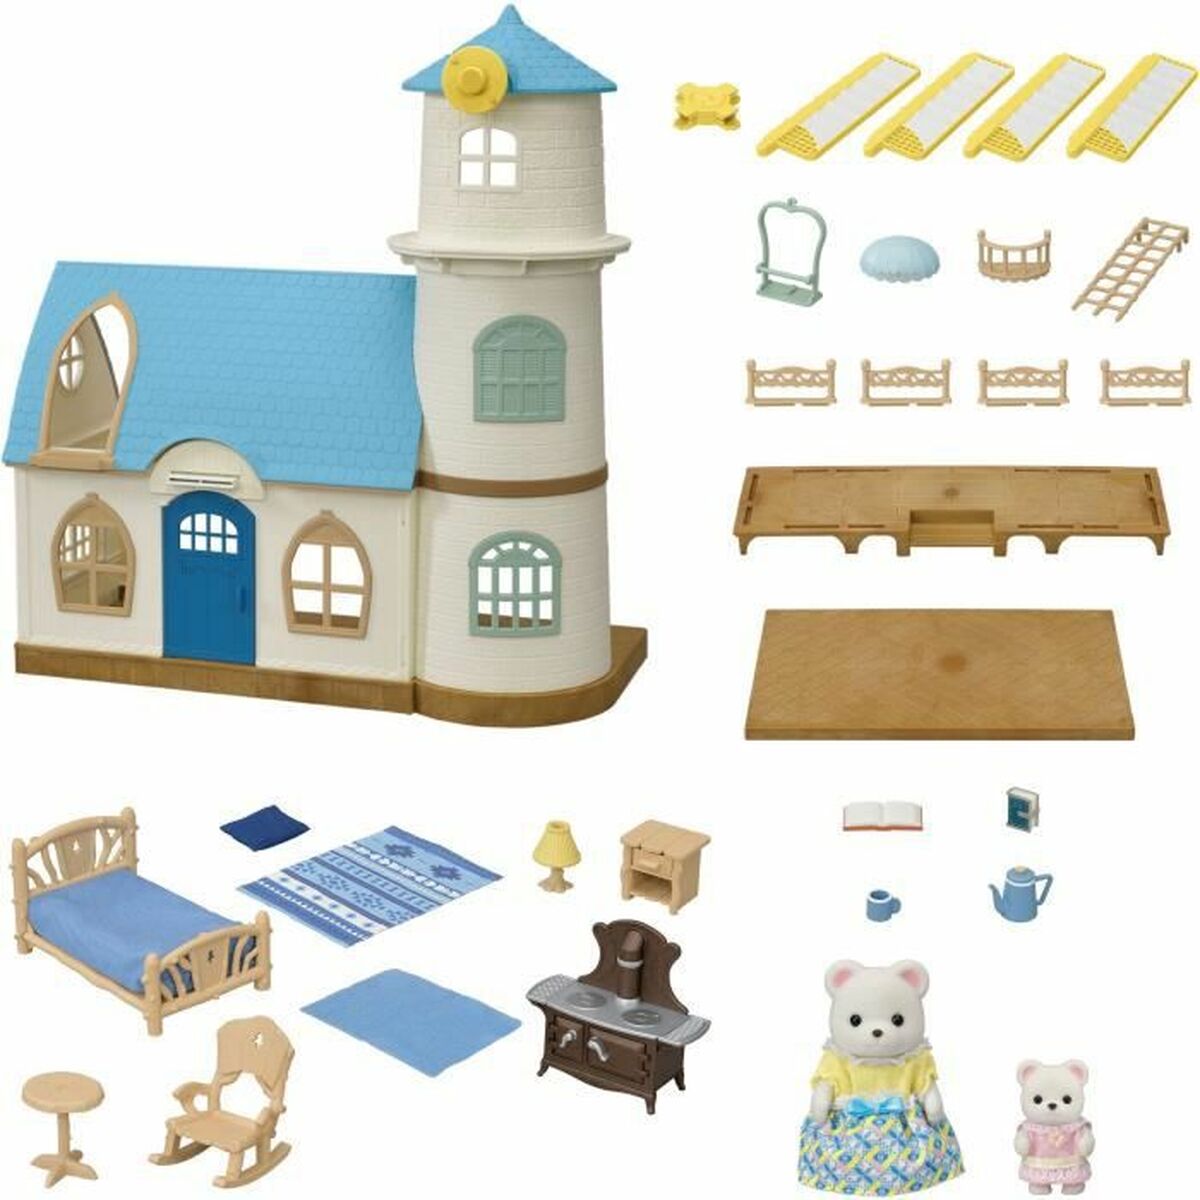 Doll's House Sylvanian Families The Big Windmill - Little Baby Shop